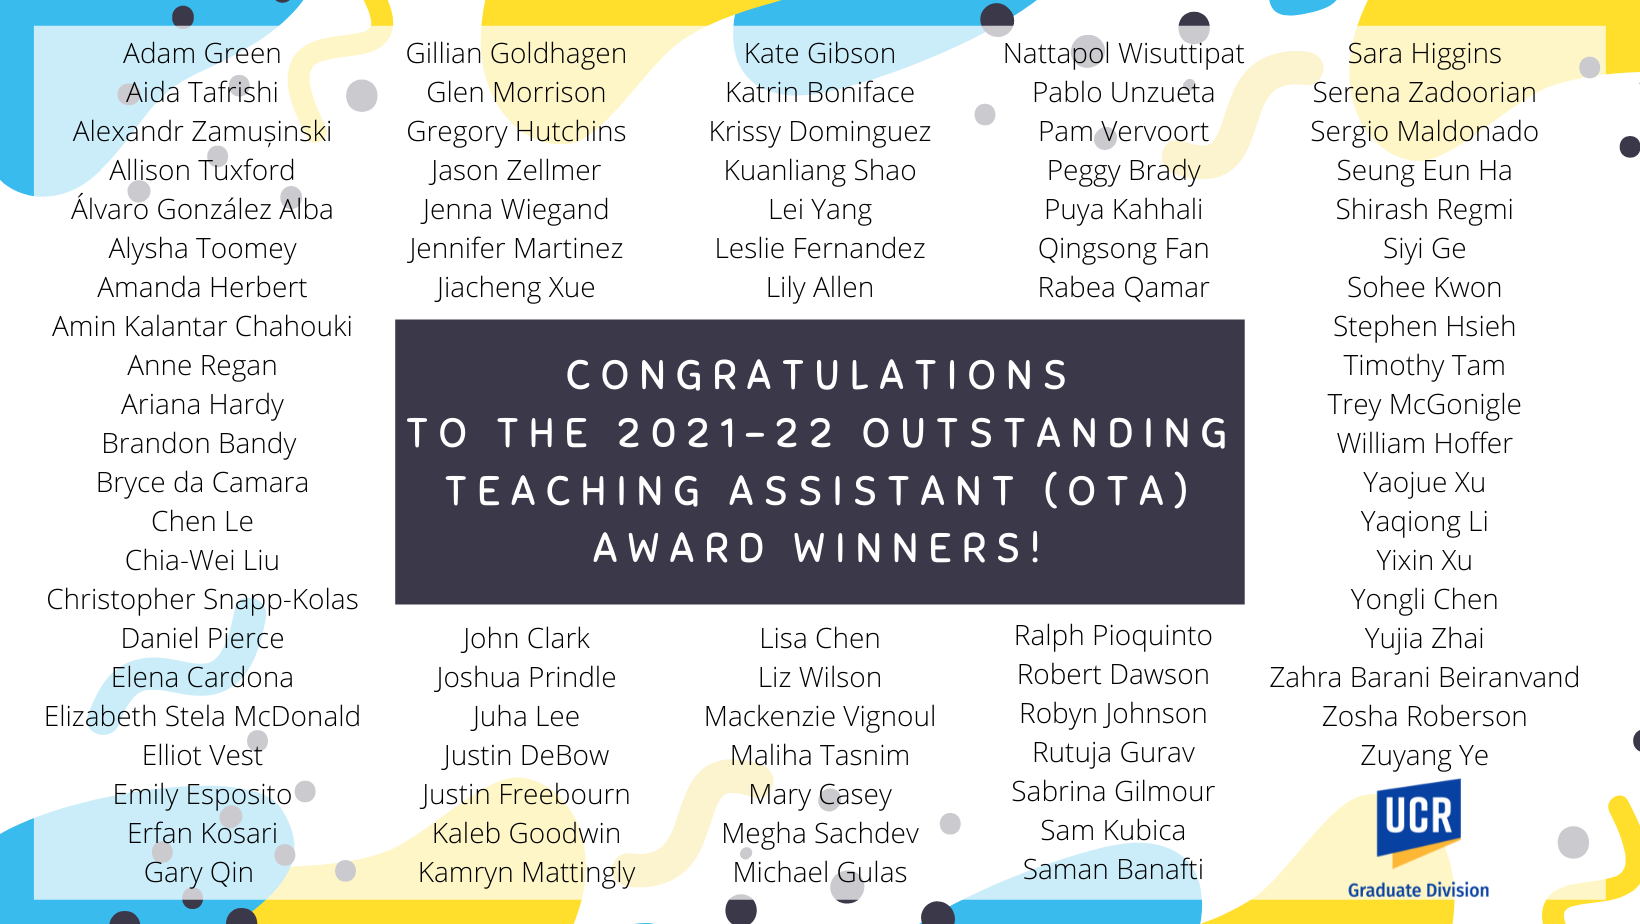 A colorful announcement of the 2021-22 Outstanding Teaching Assistant Award Winners by Name